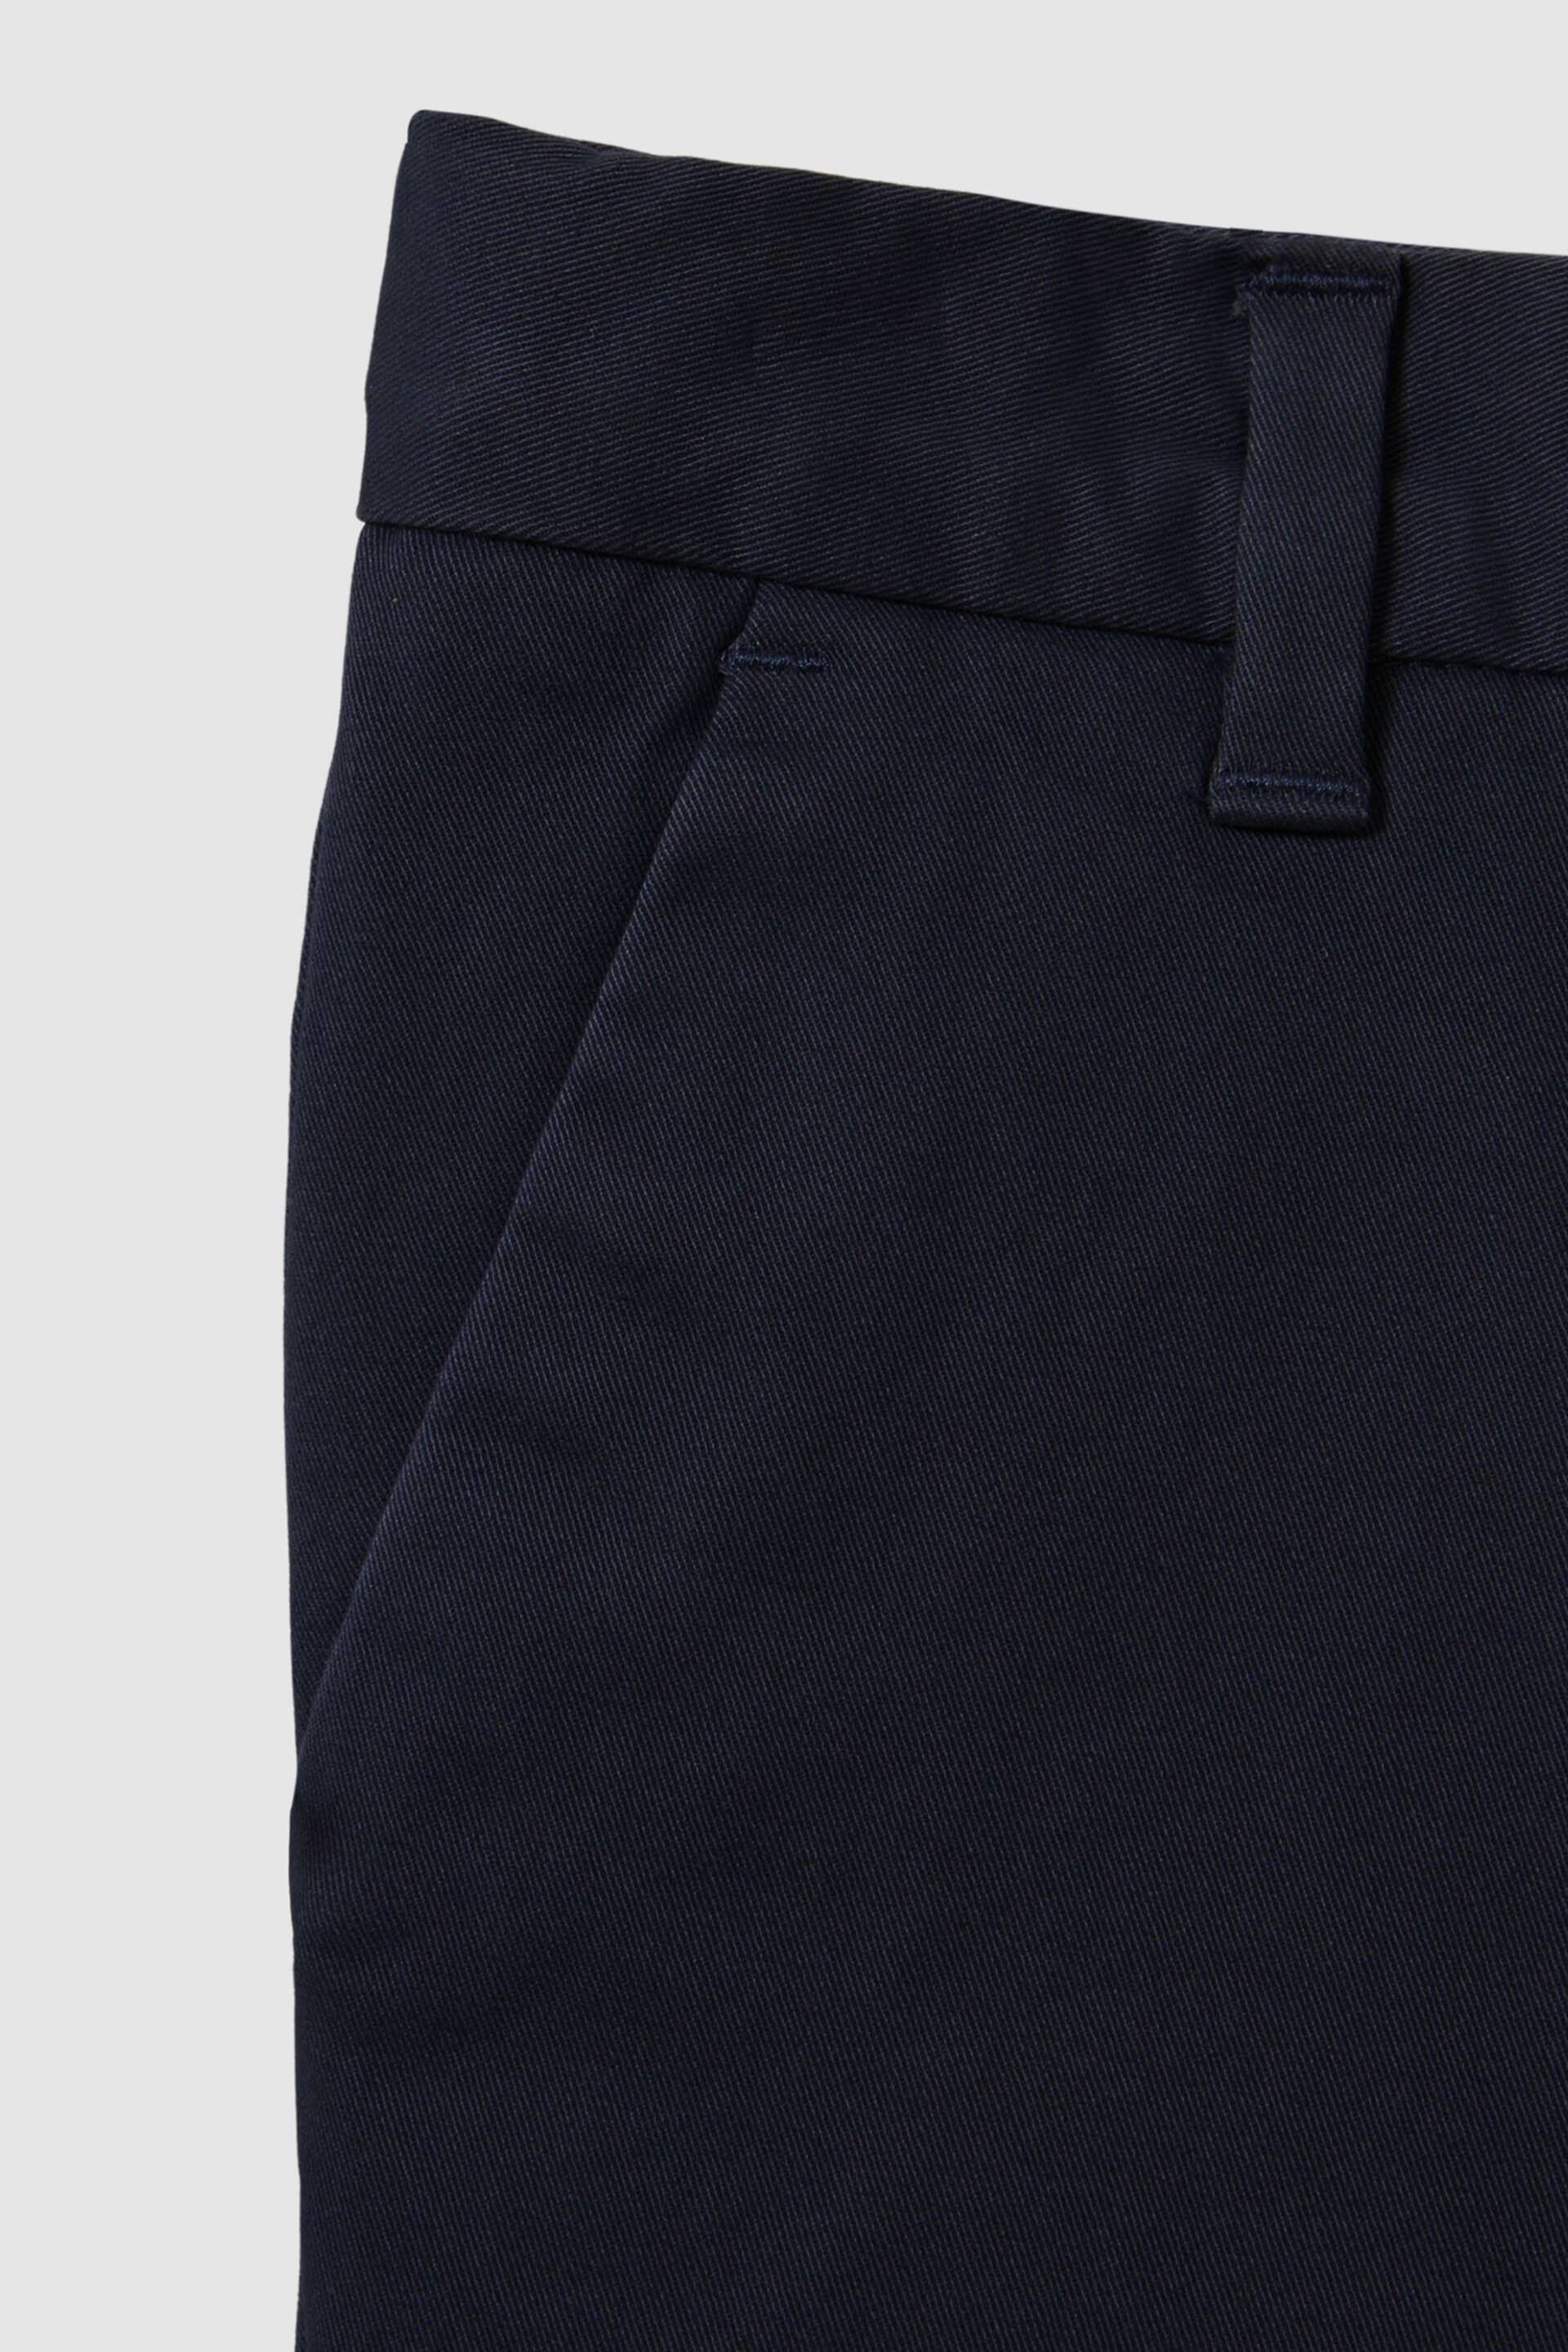 Reiss Navy Wicket Senior Casual Chino Shorts - Image 5 of 5